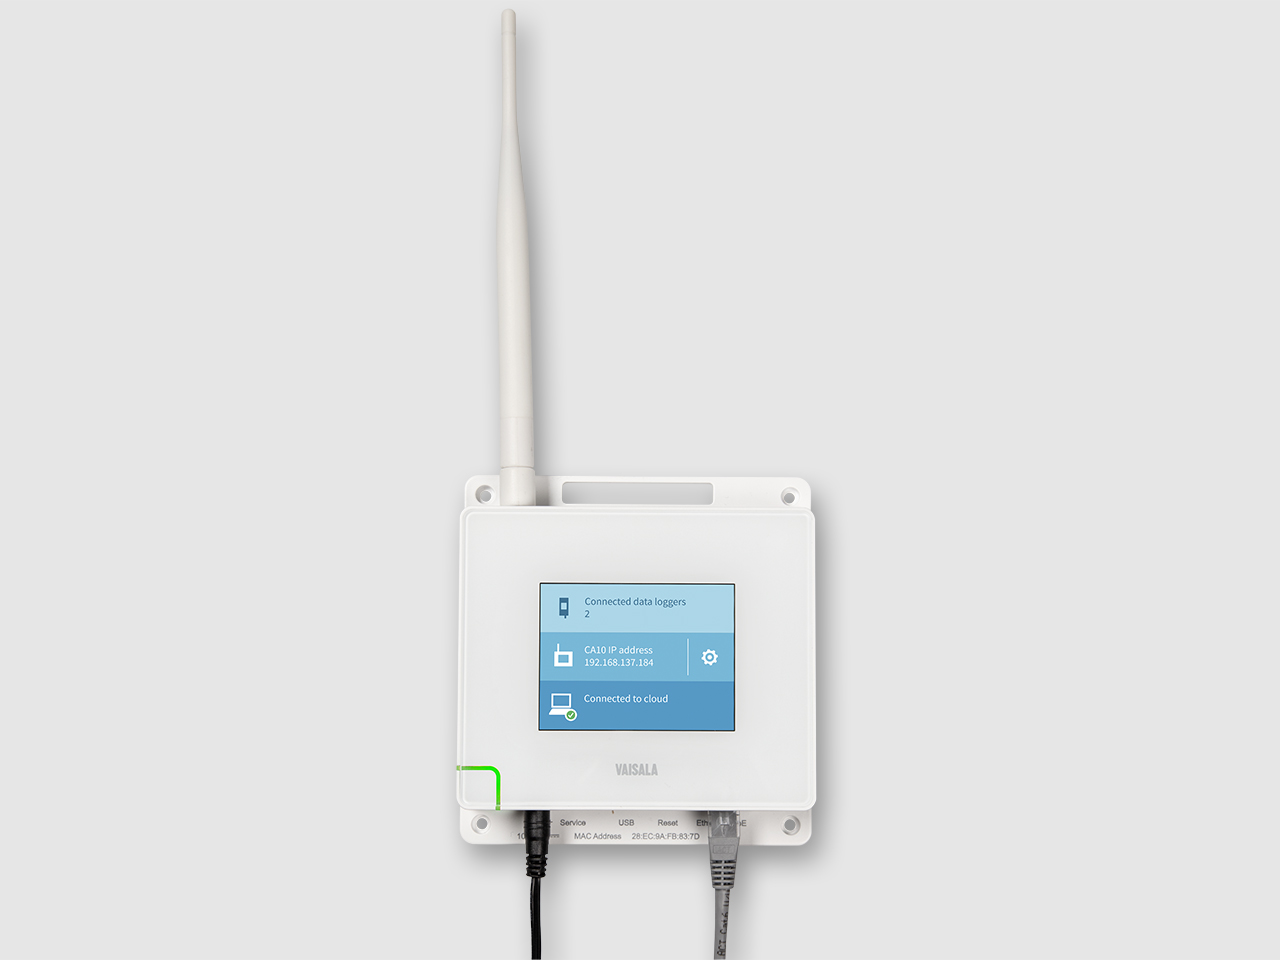 Cloud Access Point CA10 is a wireless networking hardware device that connects CWL100 data loggers to Jade Smart Cloud service.